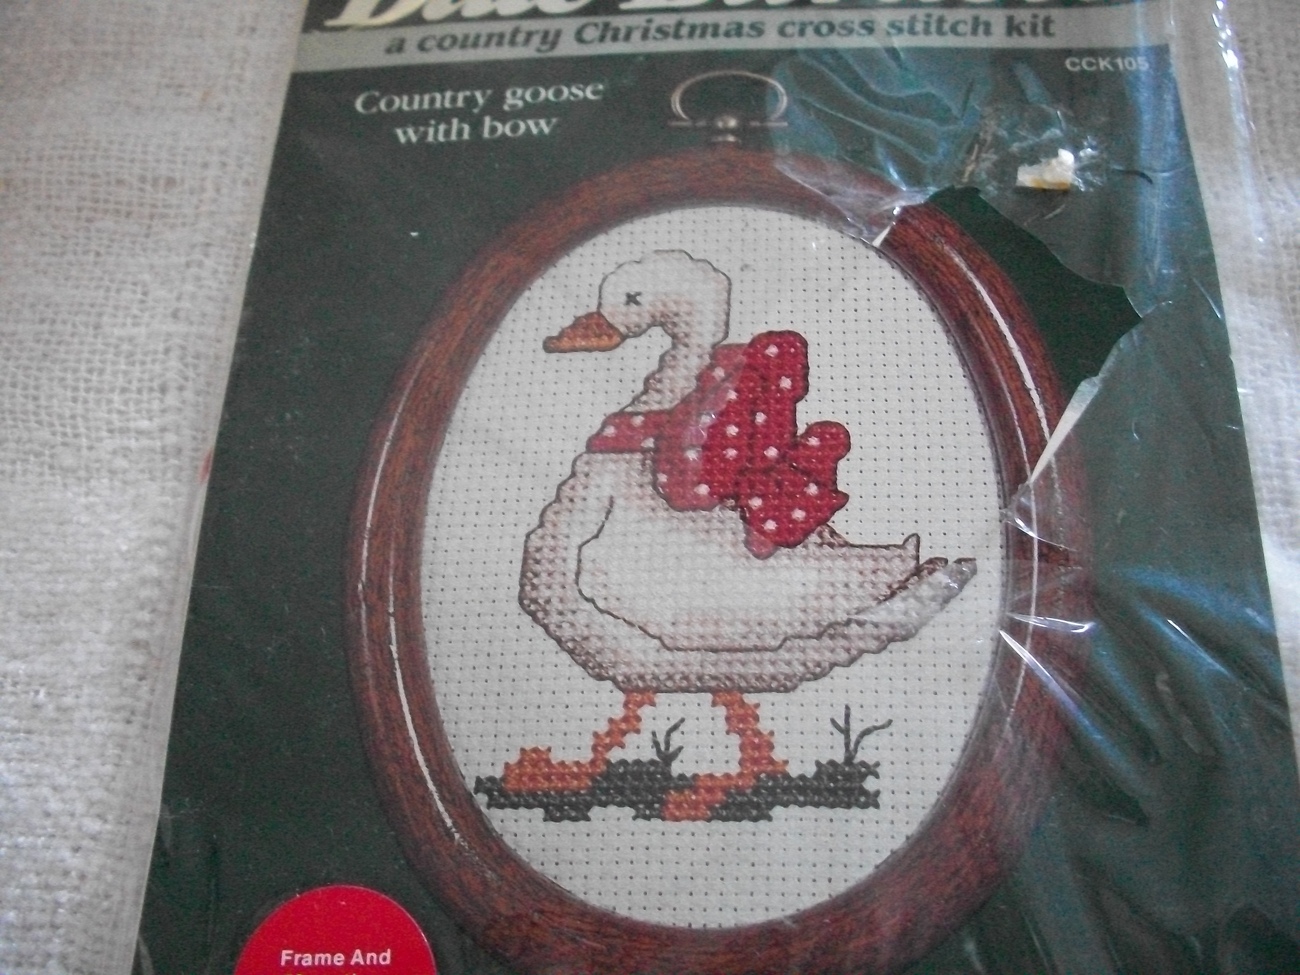 Country Goose With Bow Counted Cross Stitch Kit: Comes with Fabric, Floss & Dire - $8.00